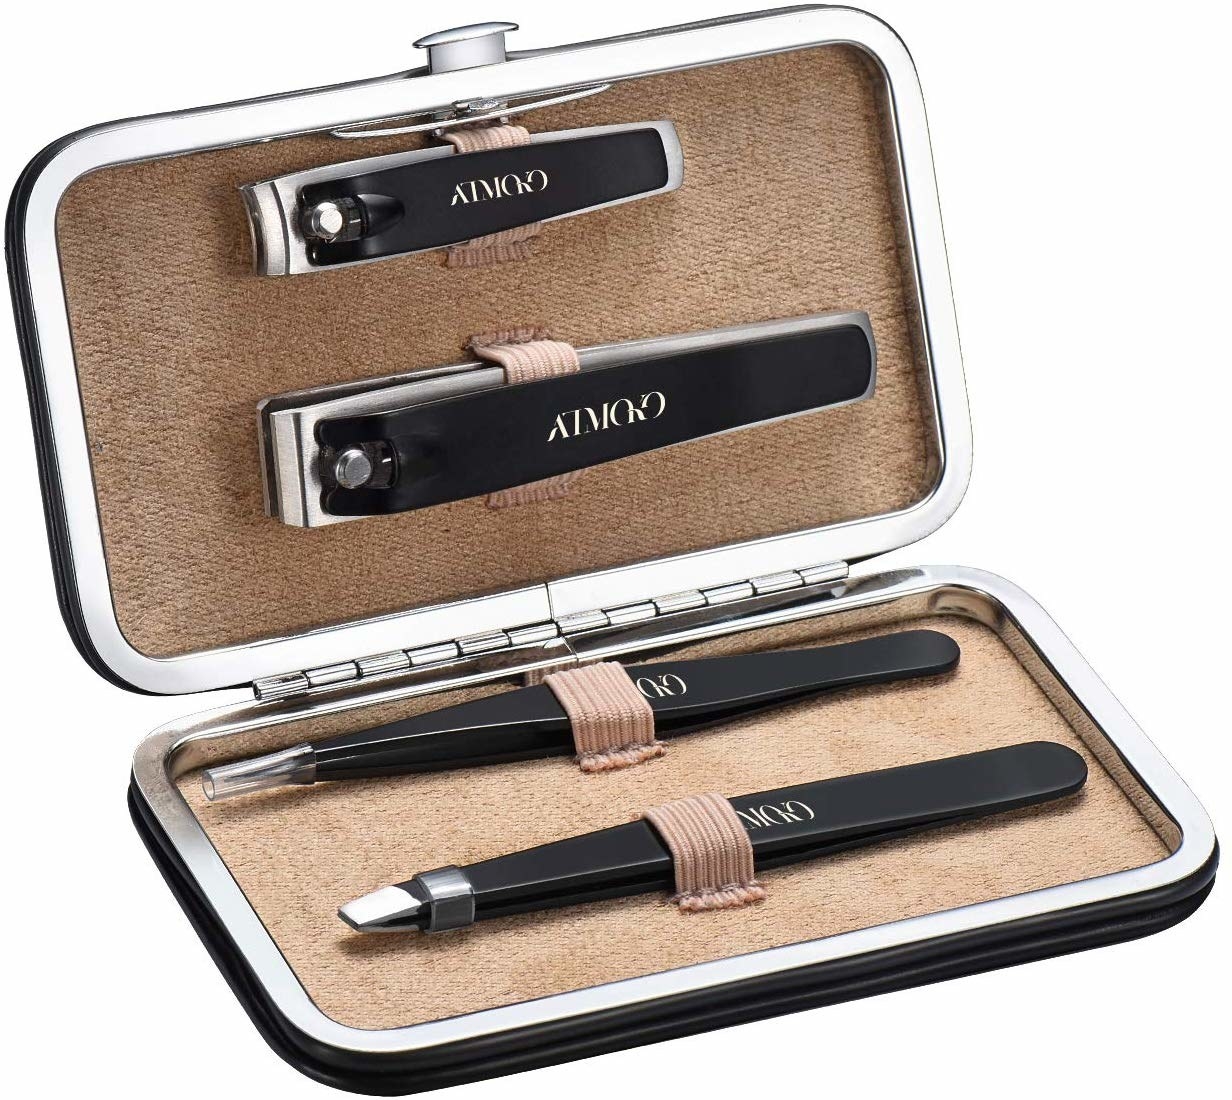 A small case with two tweezers and two nail clippers inside